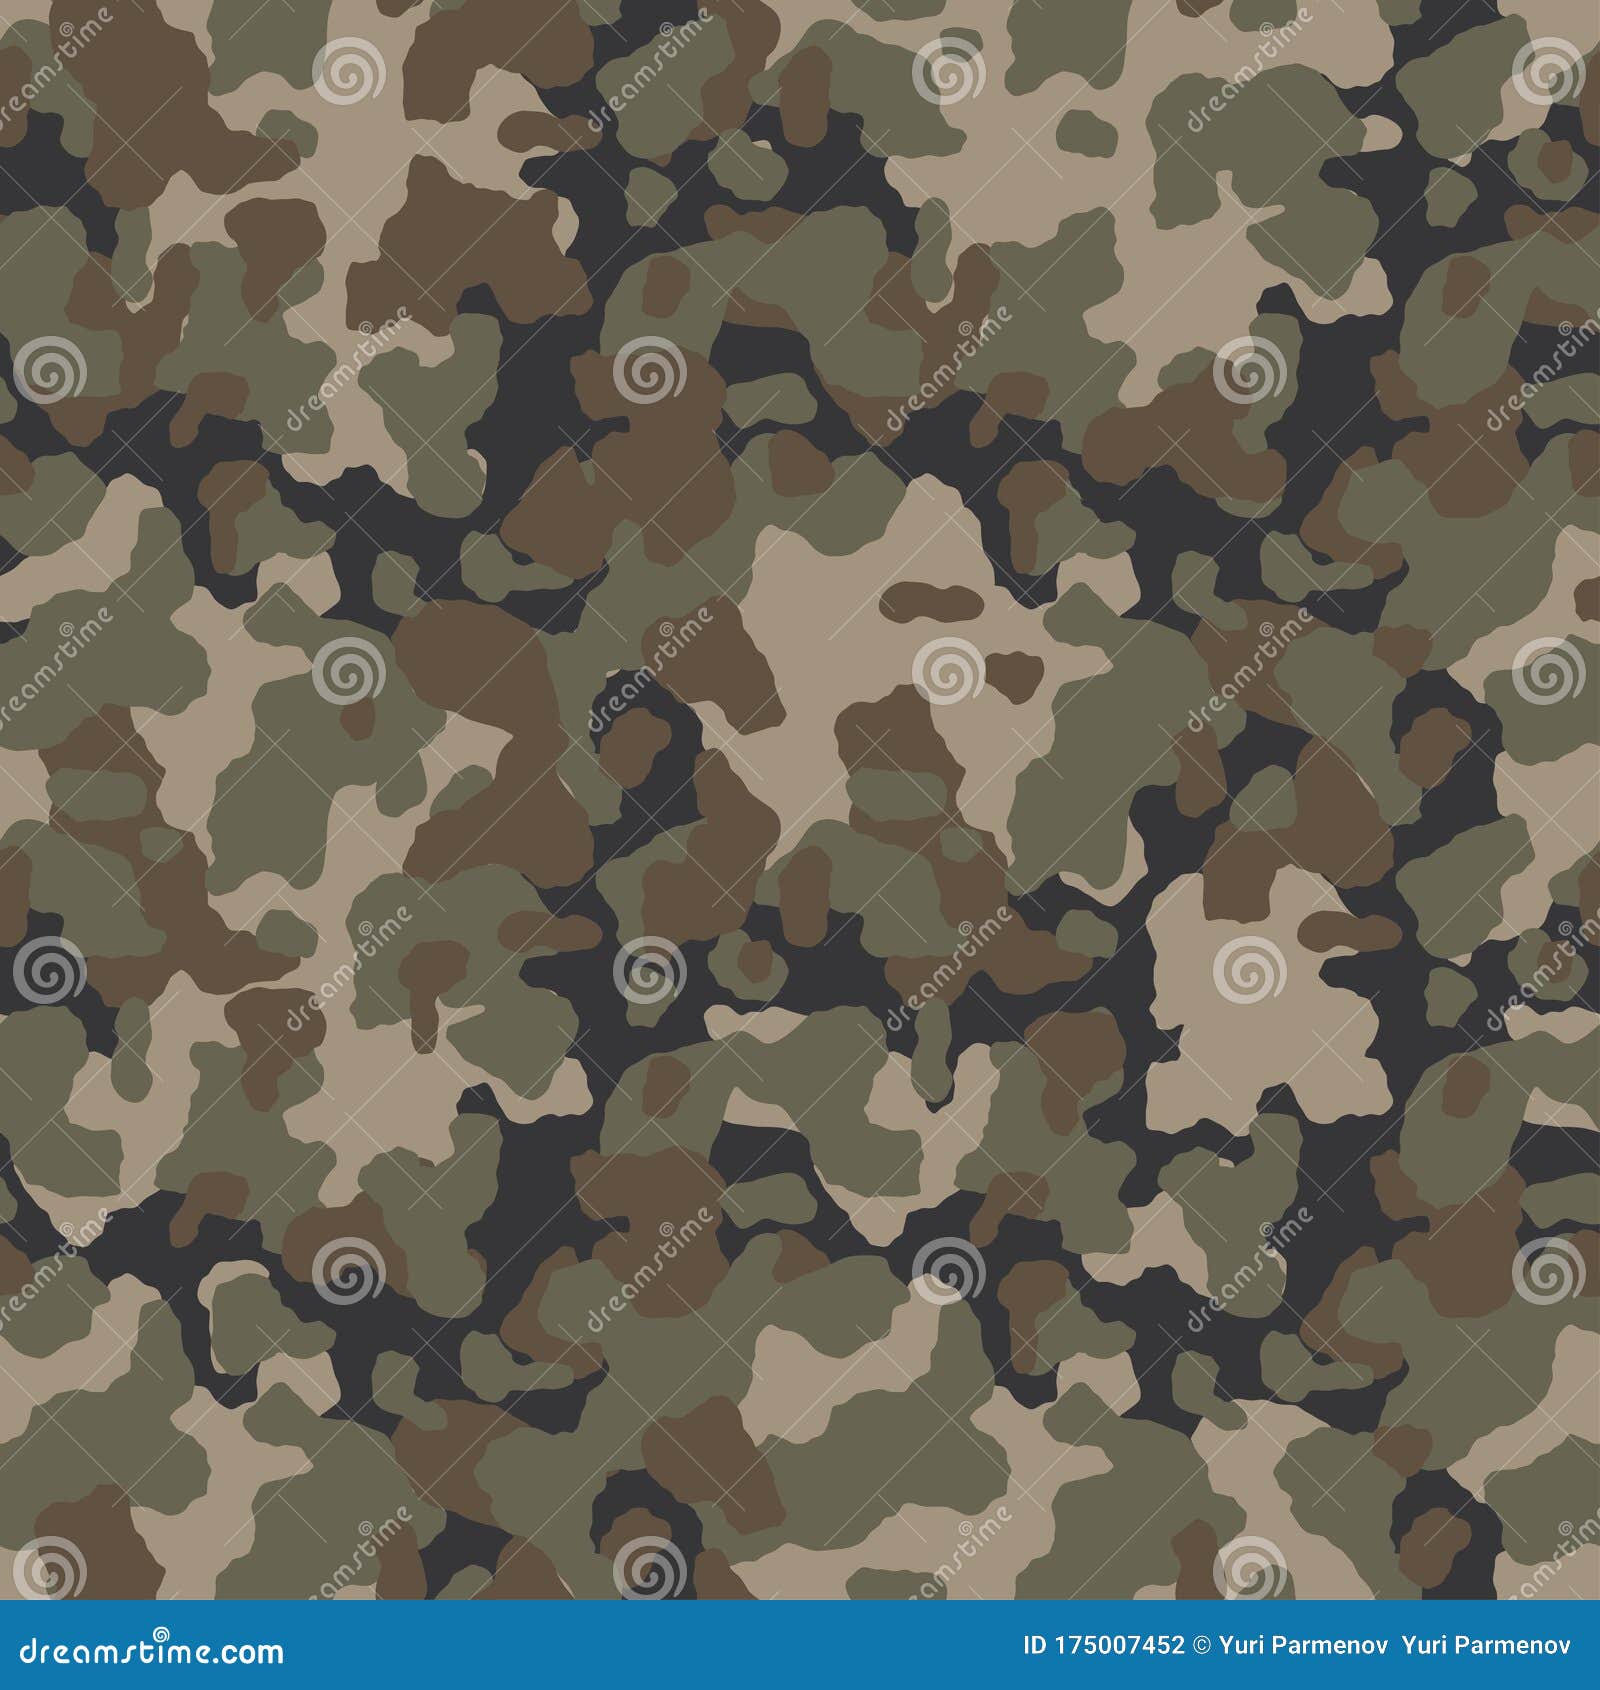 https://thumbs.dreamstime.com/z/military-camouflage-texture-repeats-seamless-camo-pattern-army-clothing-green-brown-color-fabric-hunting-vector-illustration-175007452.jpg